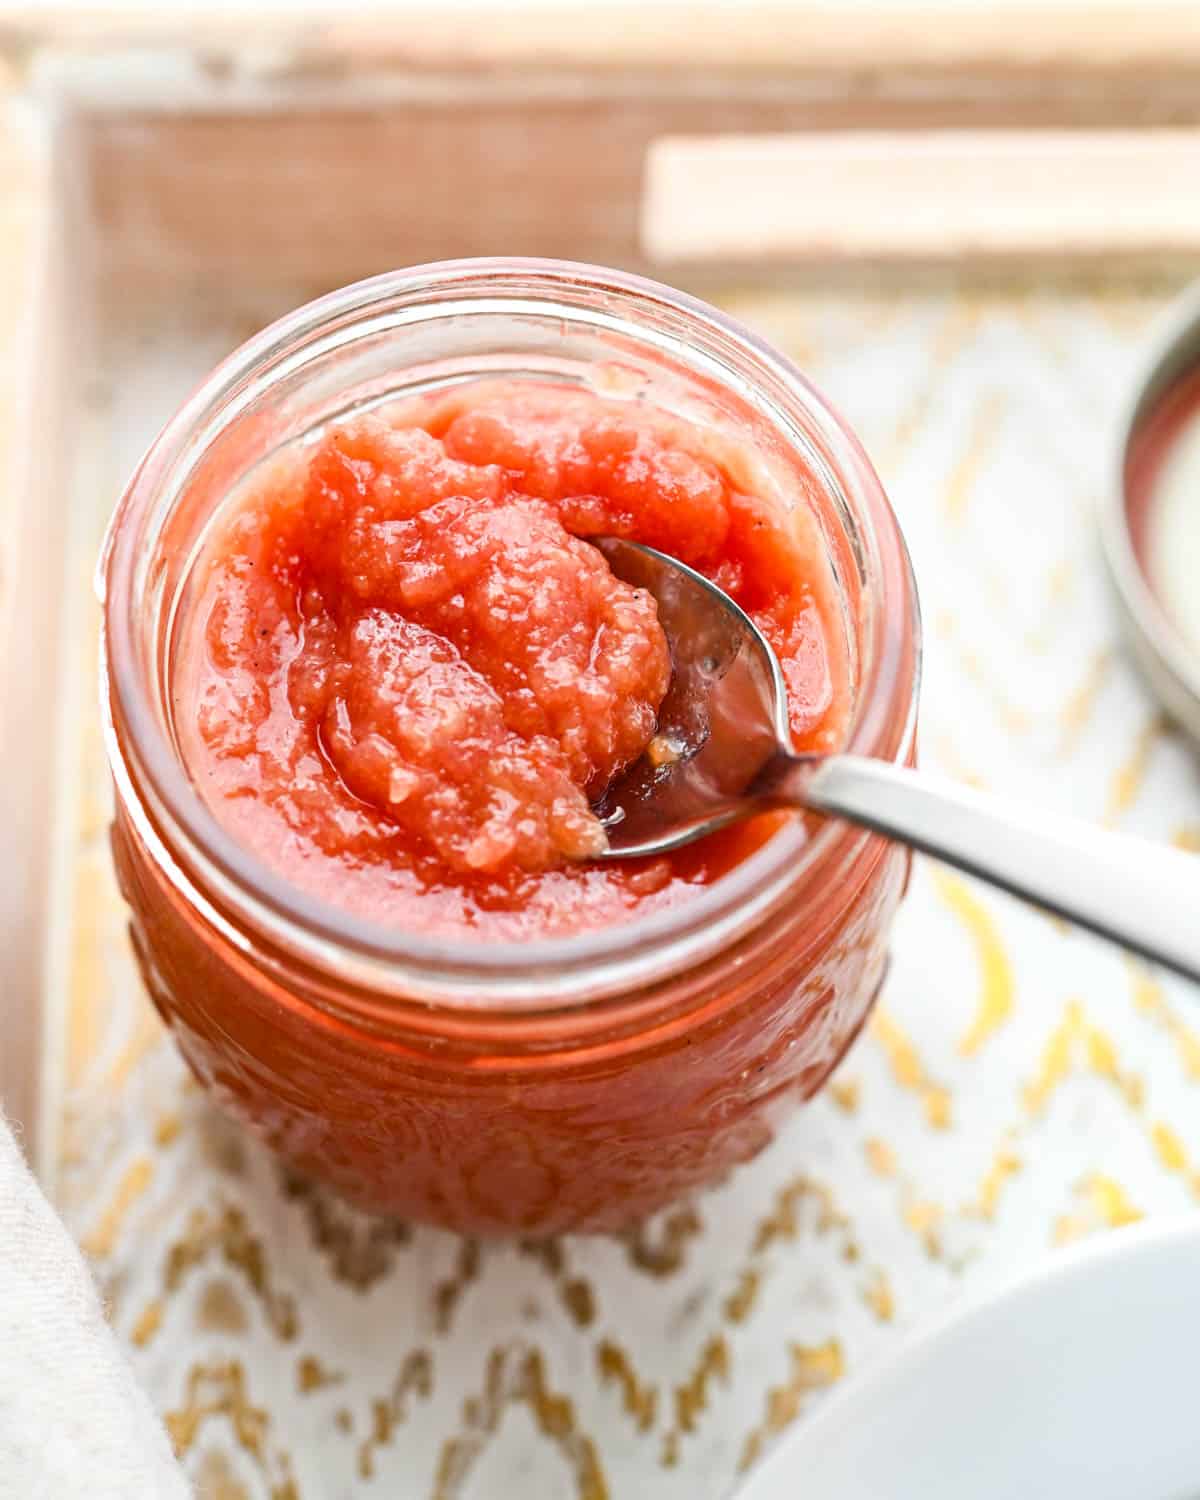 A jar of guava jam with a spoon.